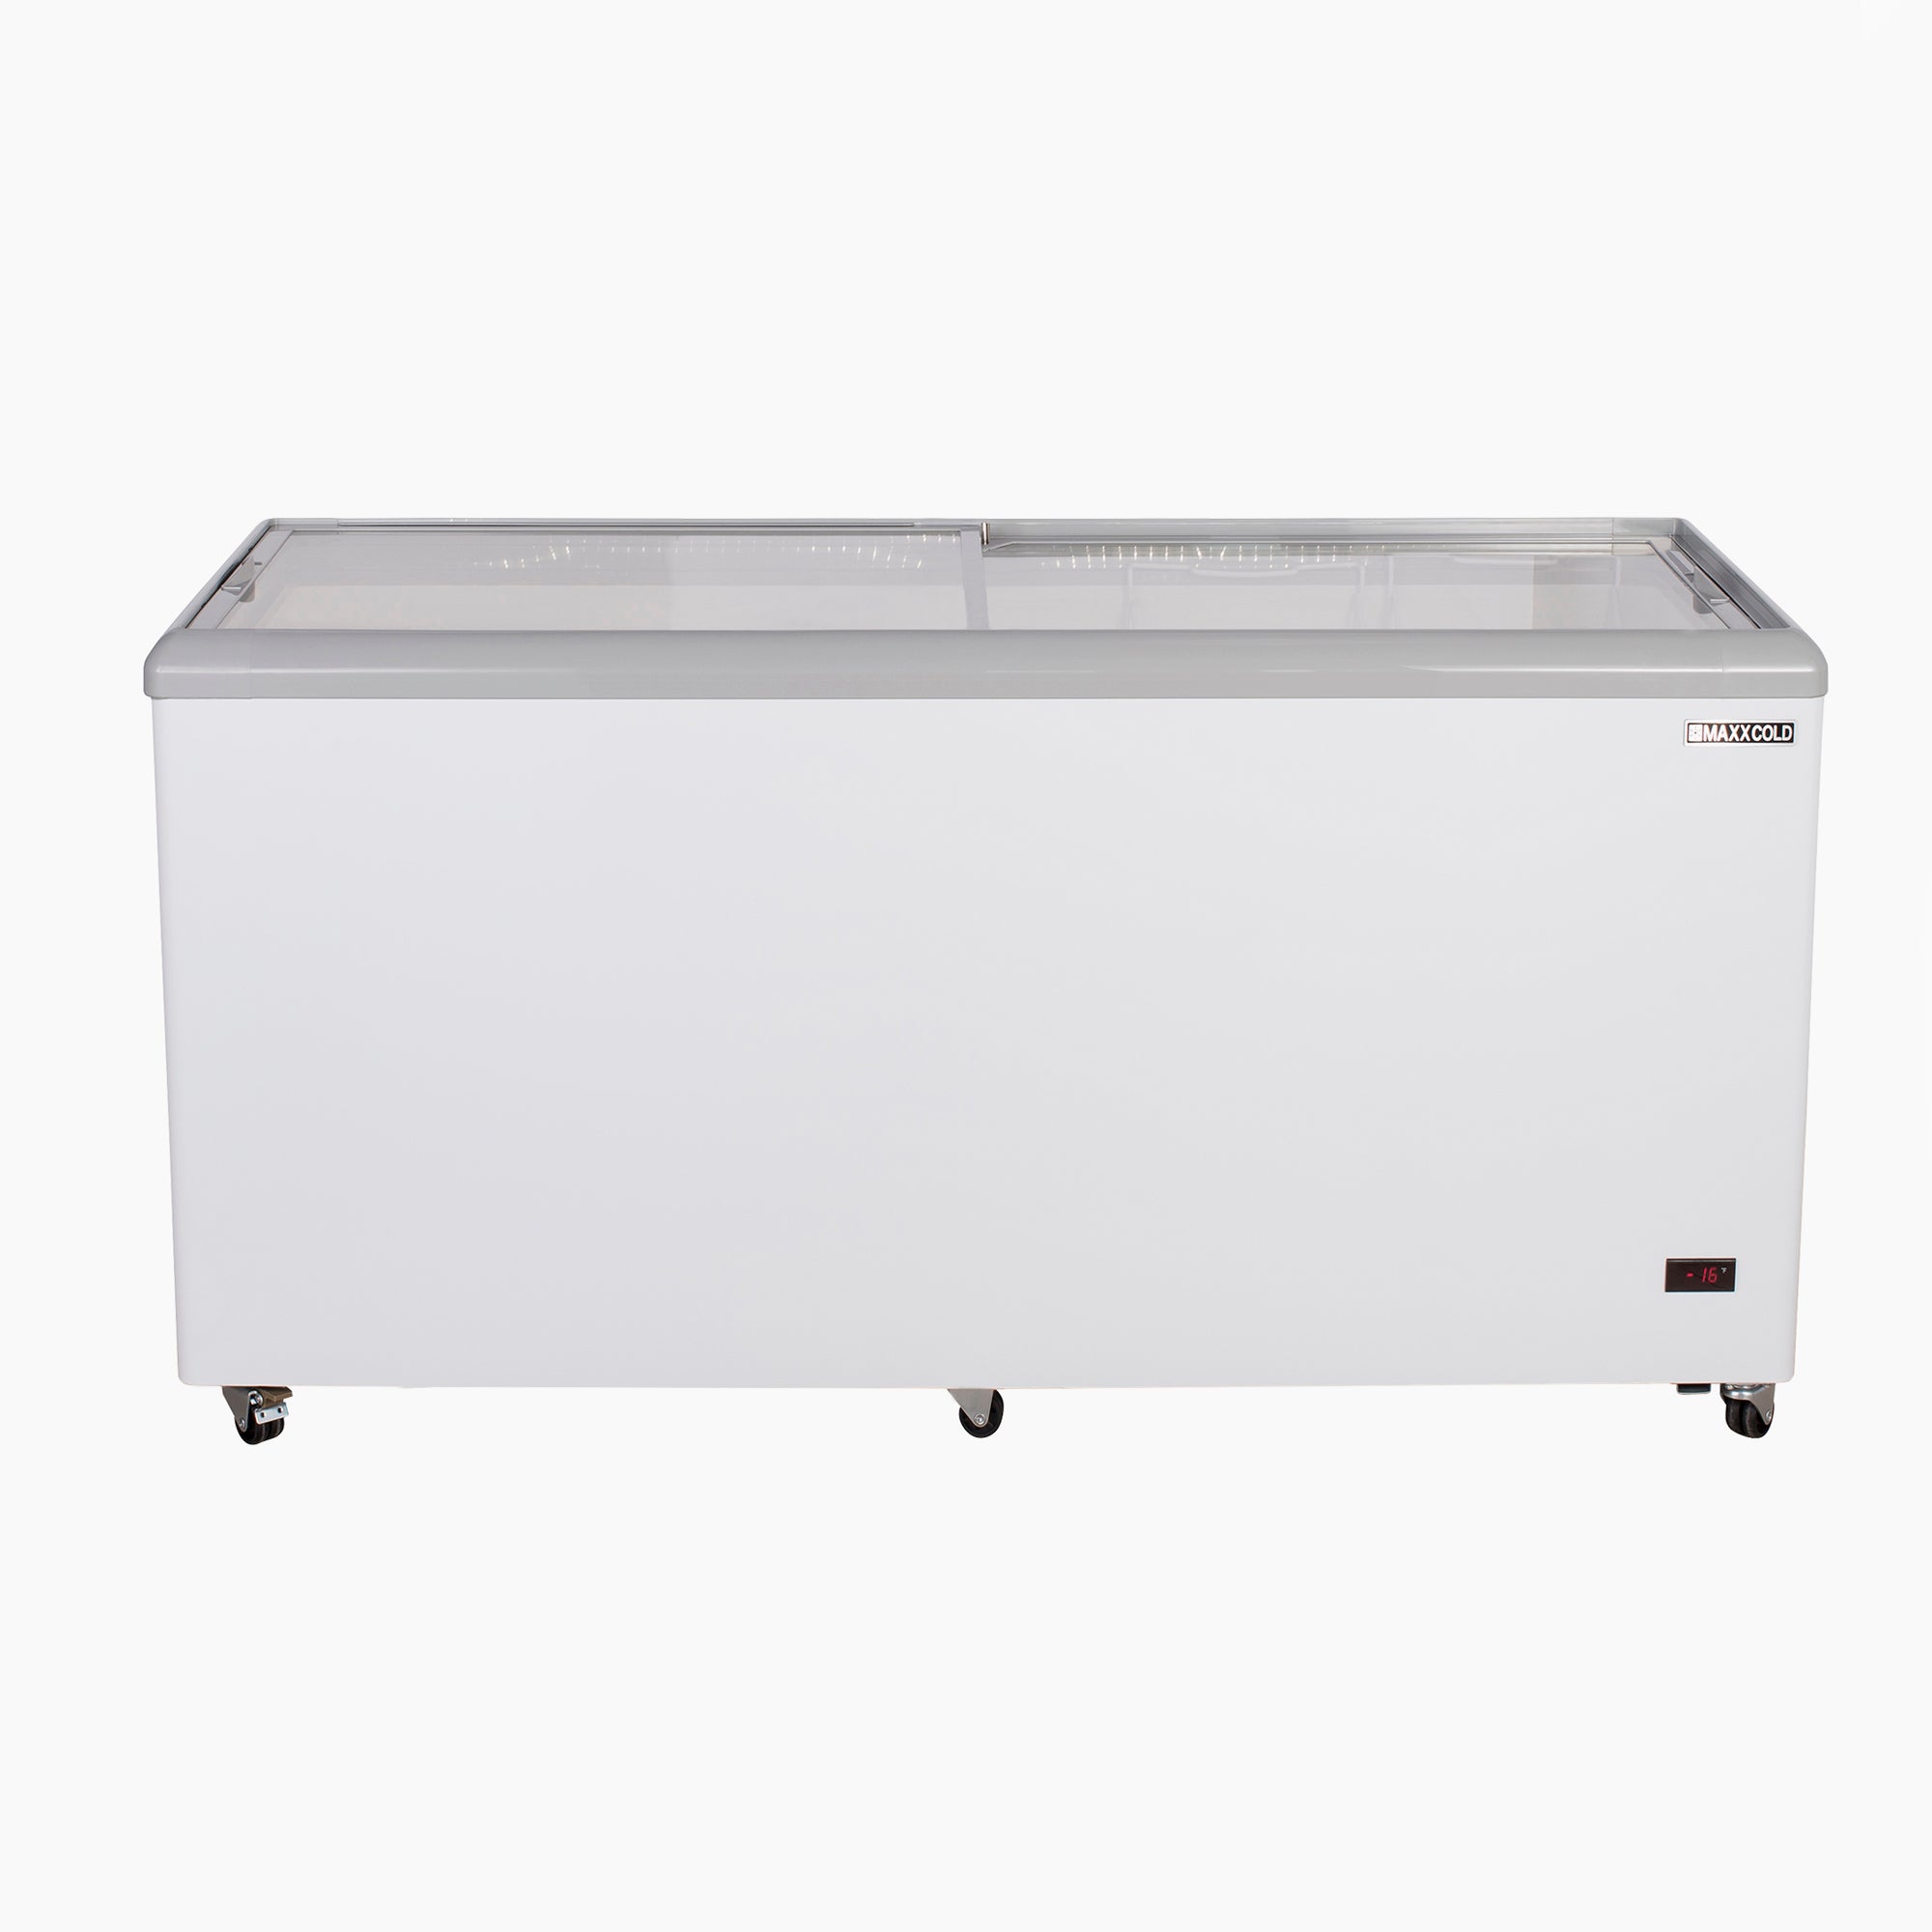 Maxx Cold - MXF52F, Maxx Cold Sliding Glass Top Mobile Ice Cream Display Freezer, 52"W, 11 cu. ft. Storage Capacity,  Equipped with (4) Wire Baskets, in White